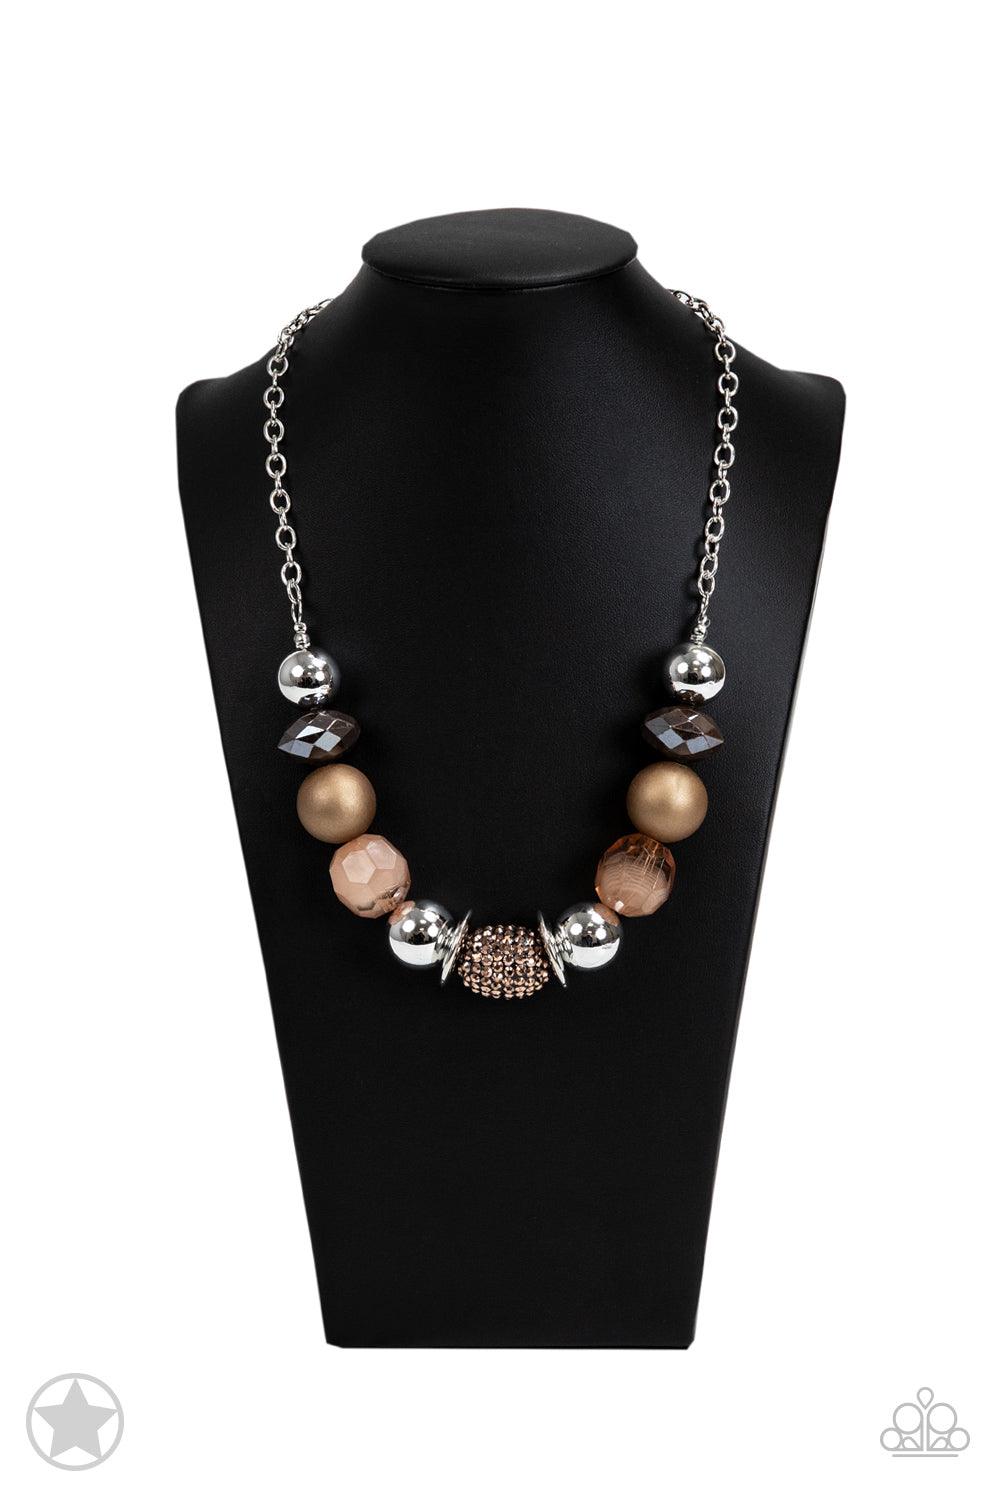 Paparazzi Accessories A Warm Welcome - Brown Warm beads in shades of brown and copper with reflective faceted edges and varying glazed finishes are offset by two shiny silver beads. An oblong bead studded with copper-toned rhinestones adds a dramatic acce